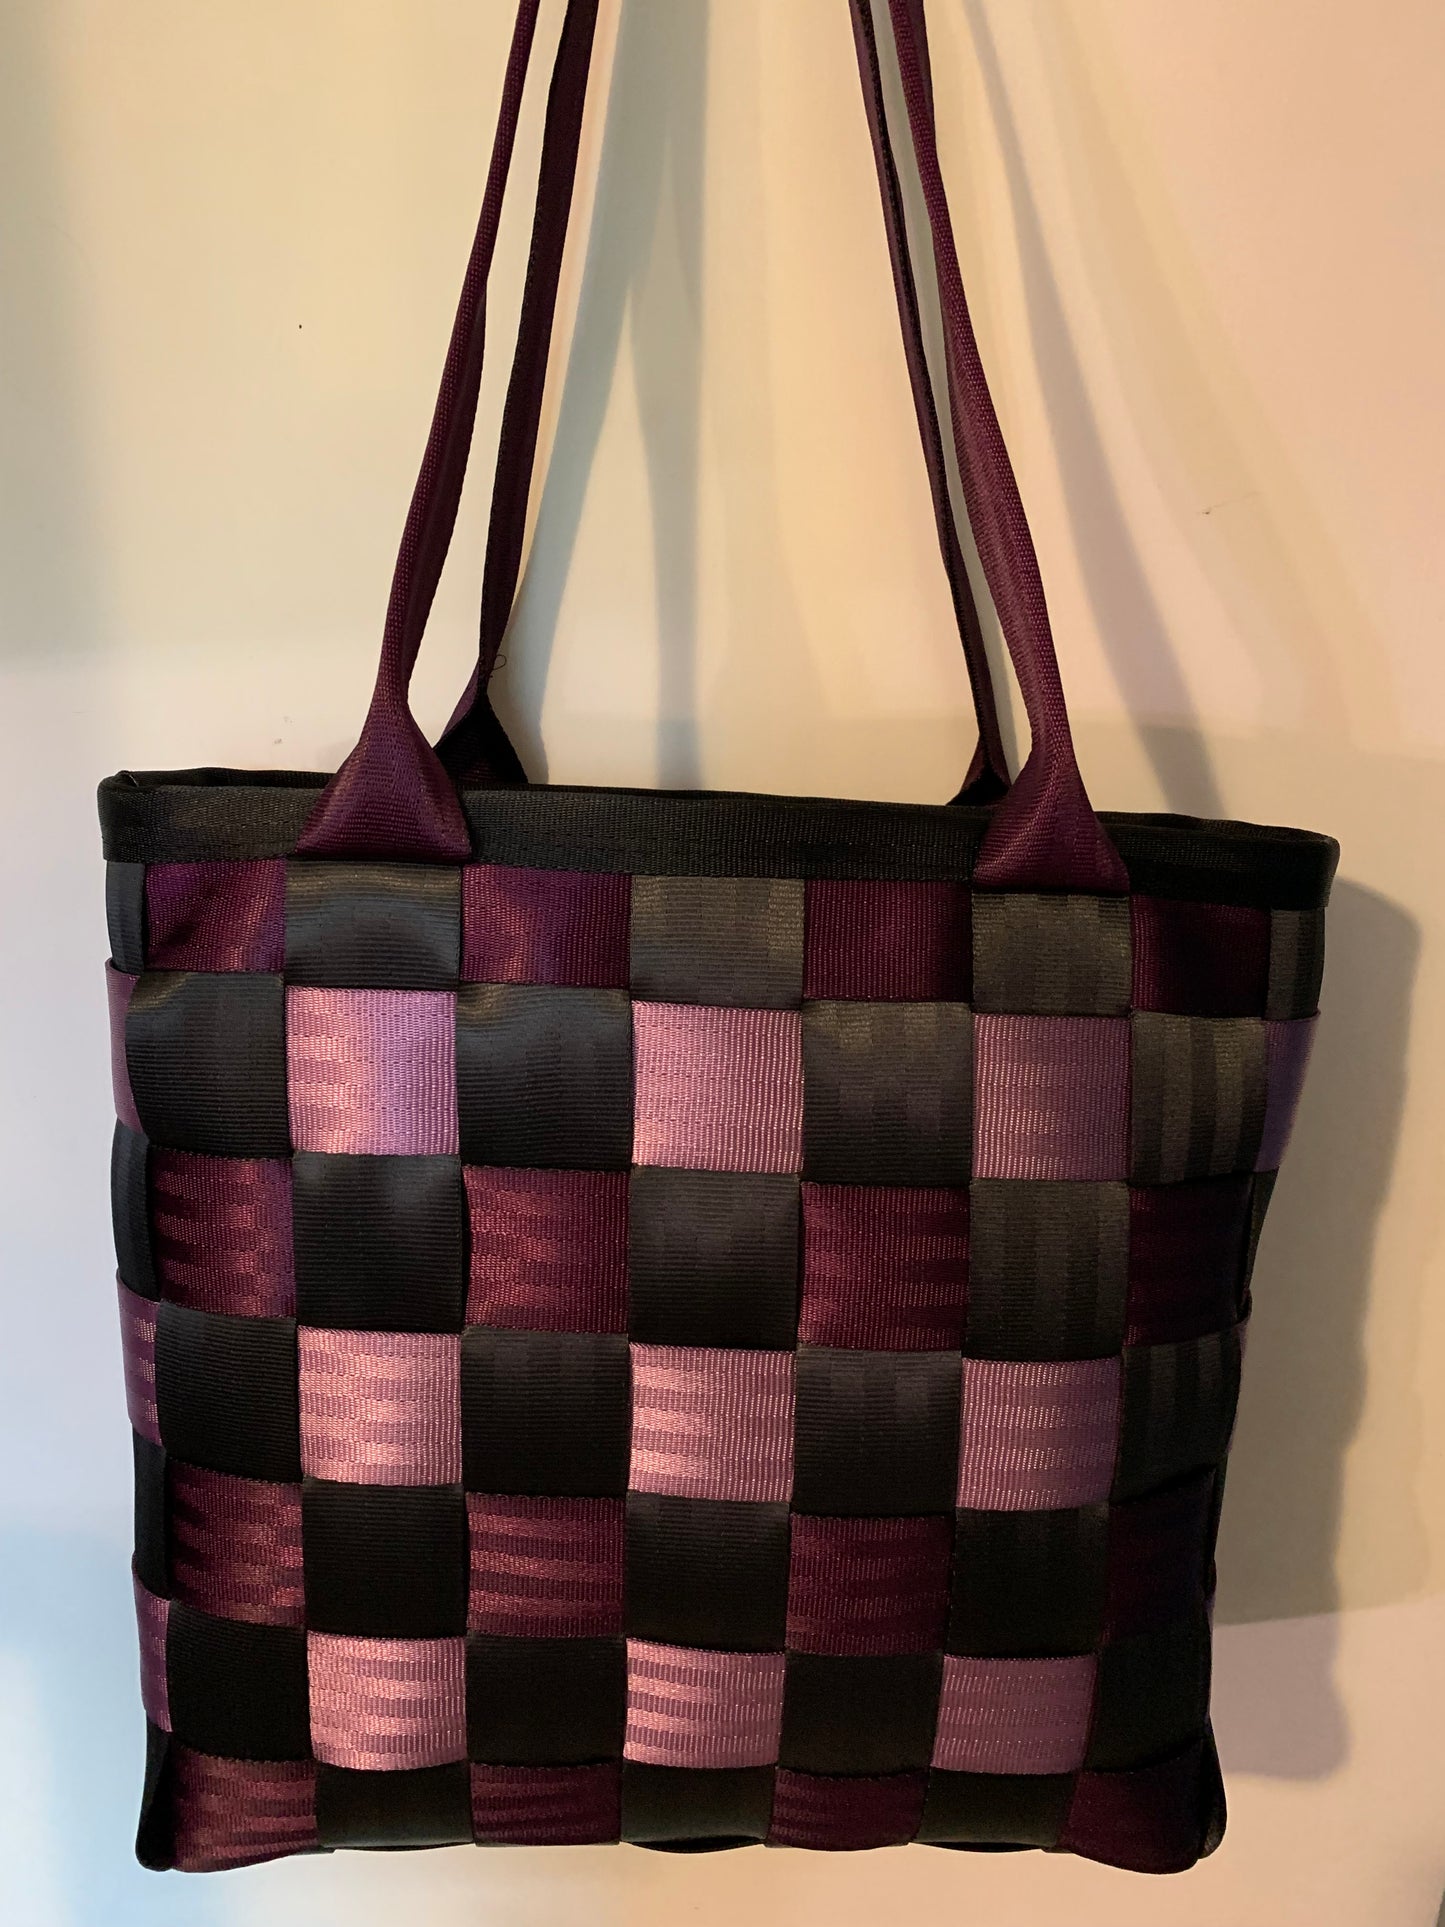 Large seat belt tote, weave style in charcoal, plum and lilac, seatbelt handbag, extra large purse